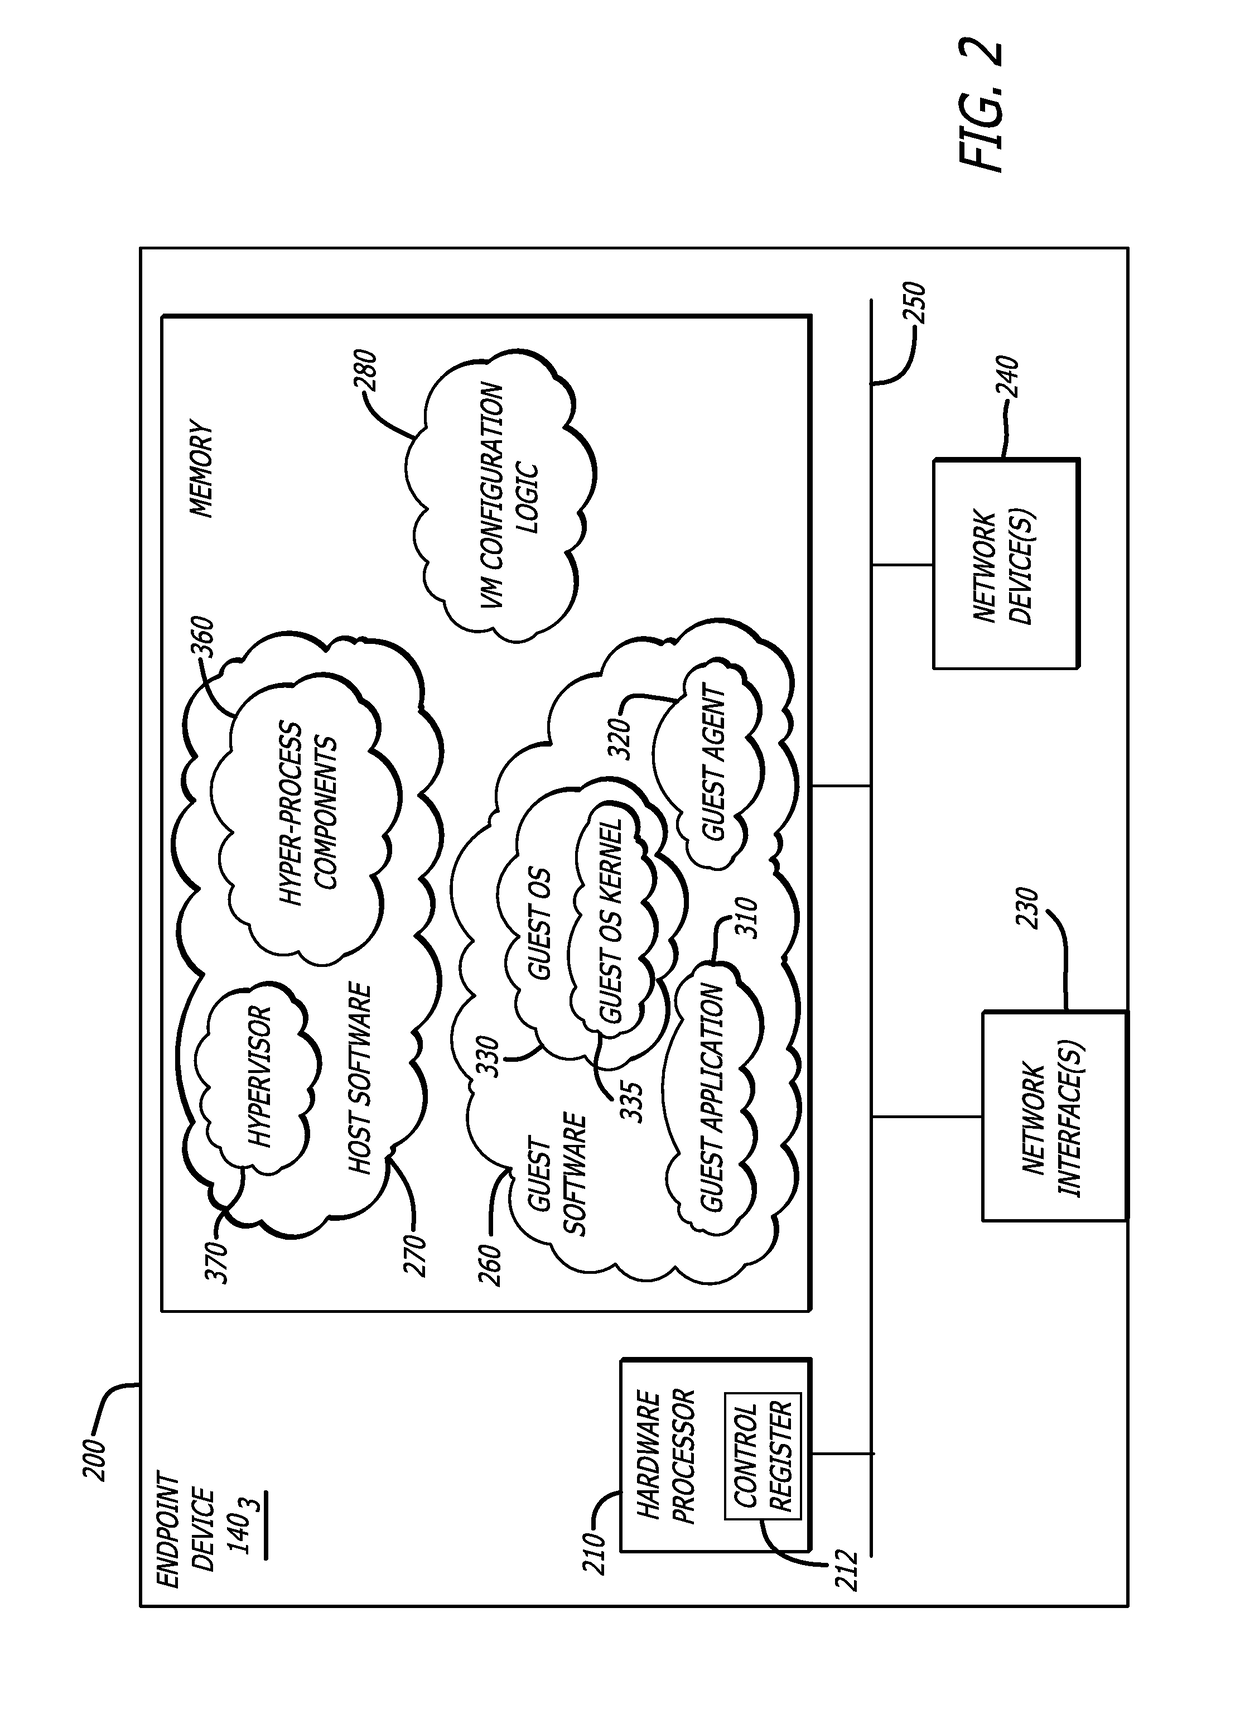 System and method of threat detection under hypervisor control